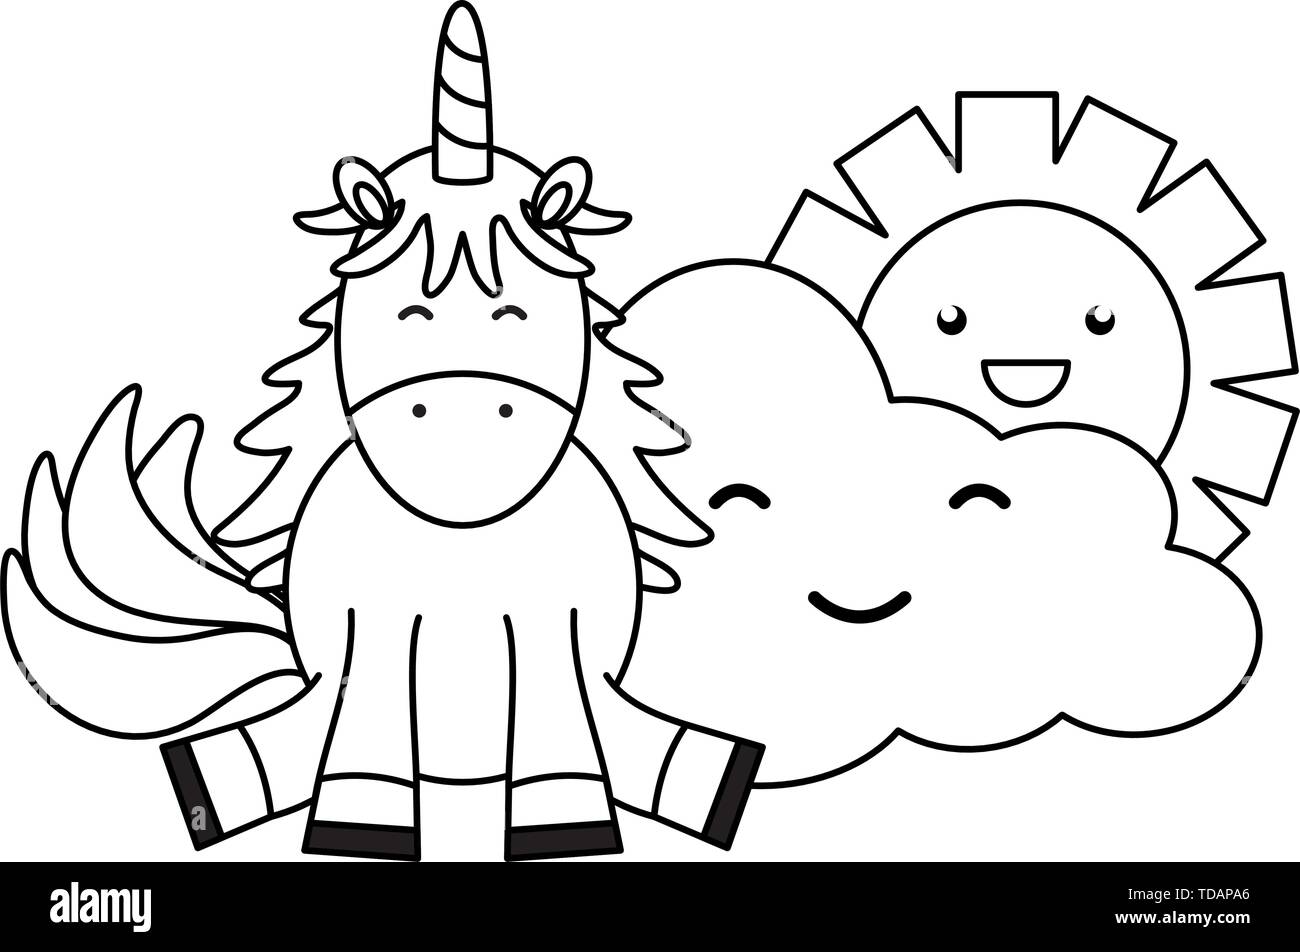 cute adorable unicorn with clouds and sun kawaii characters vector illustration Stock Vector